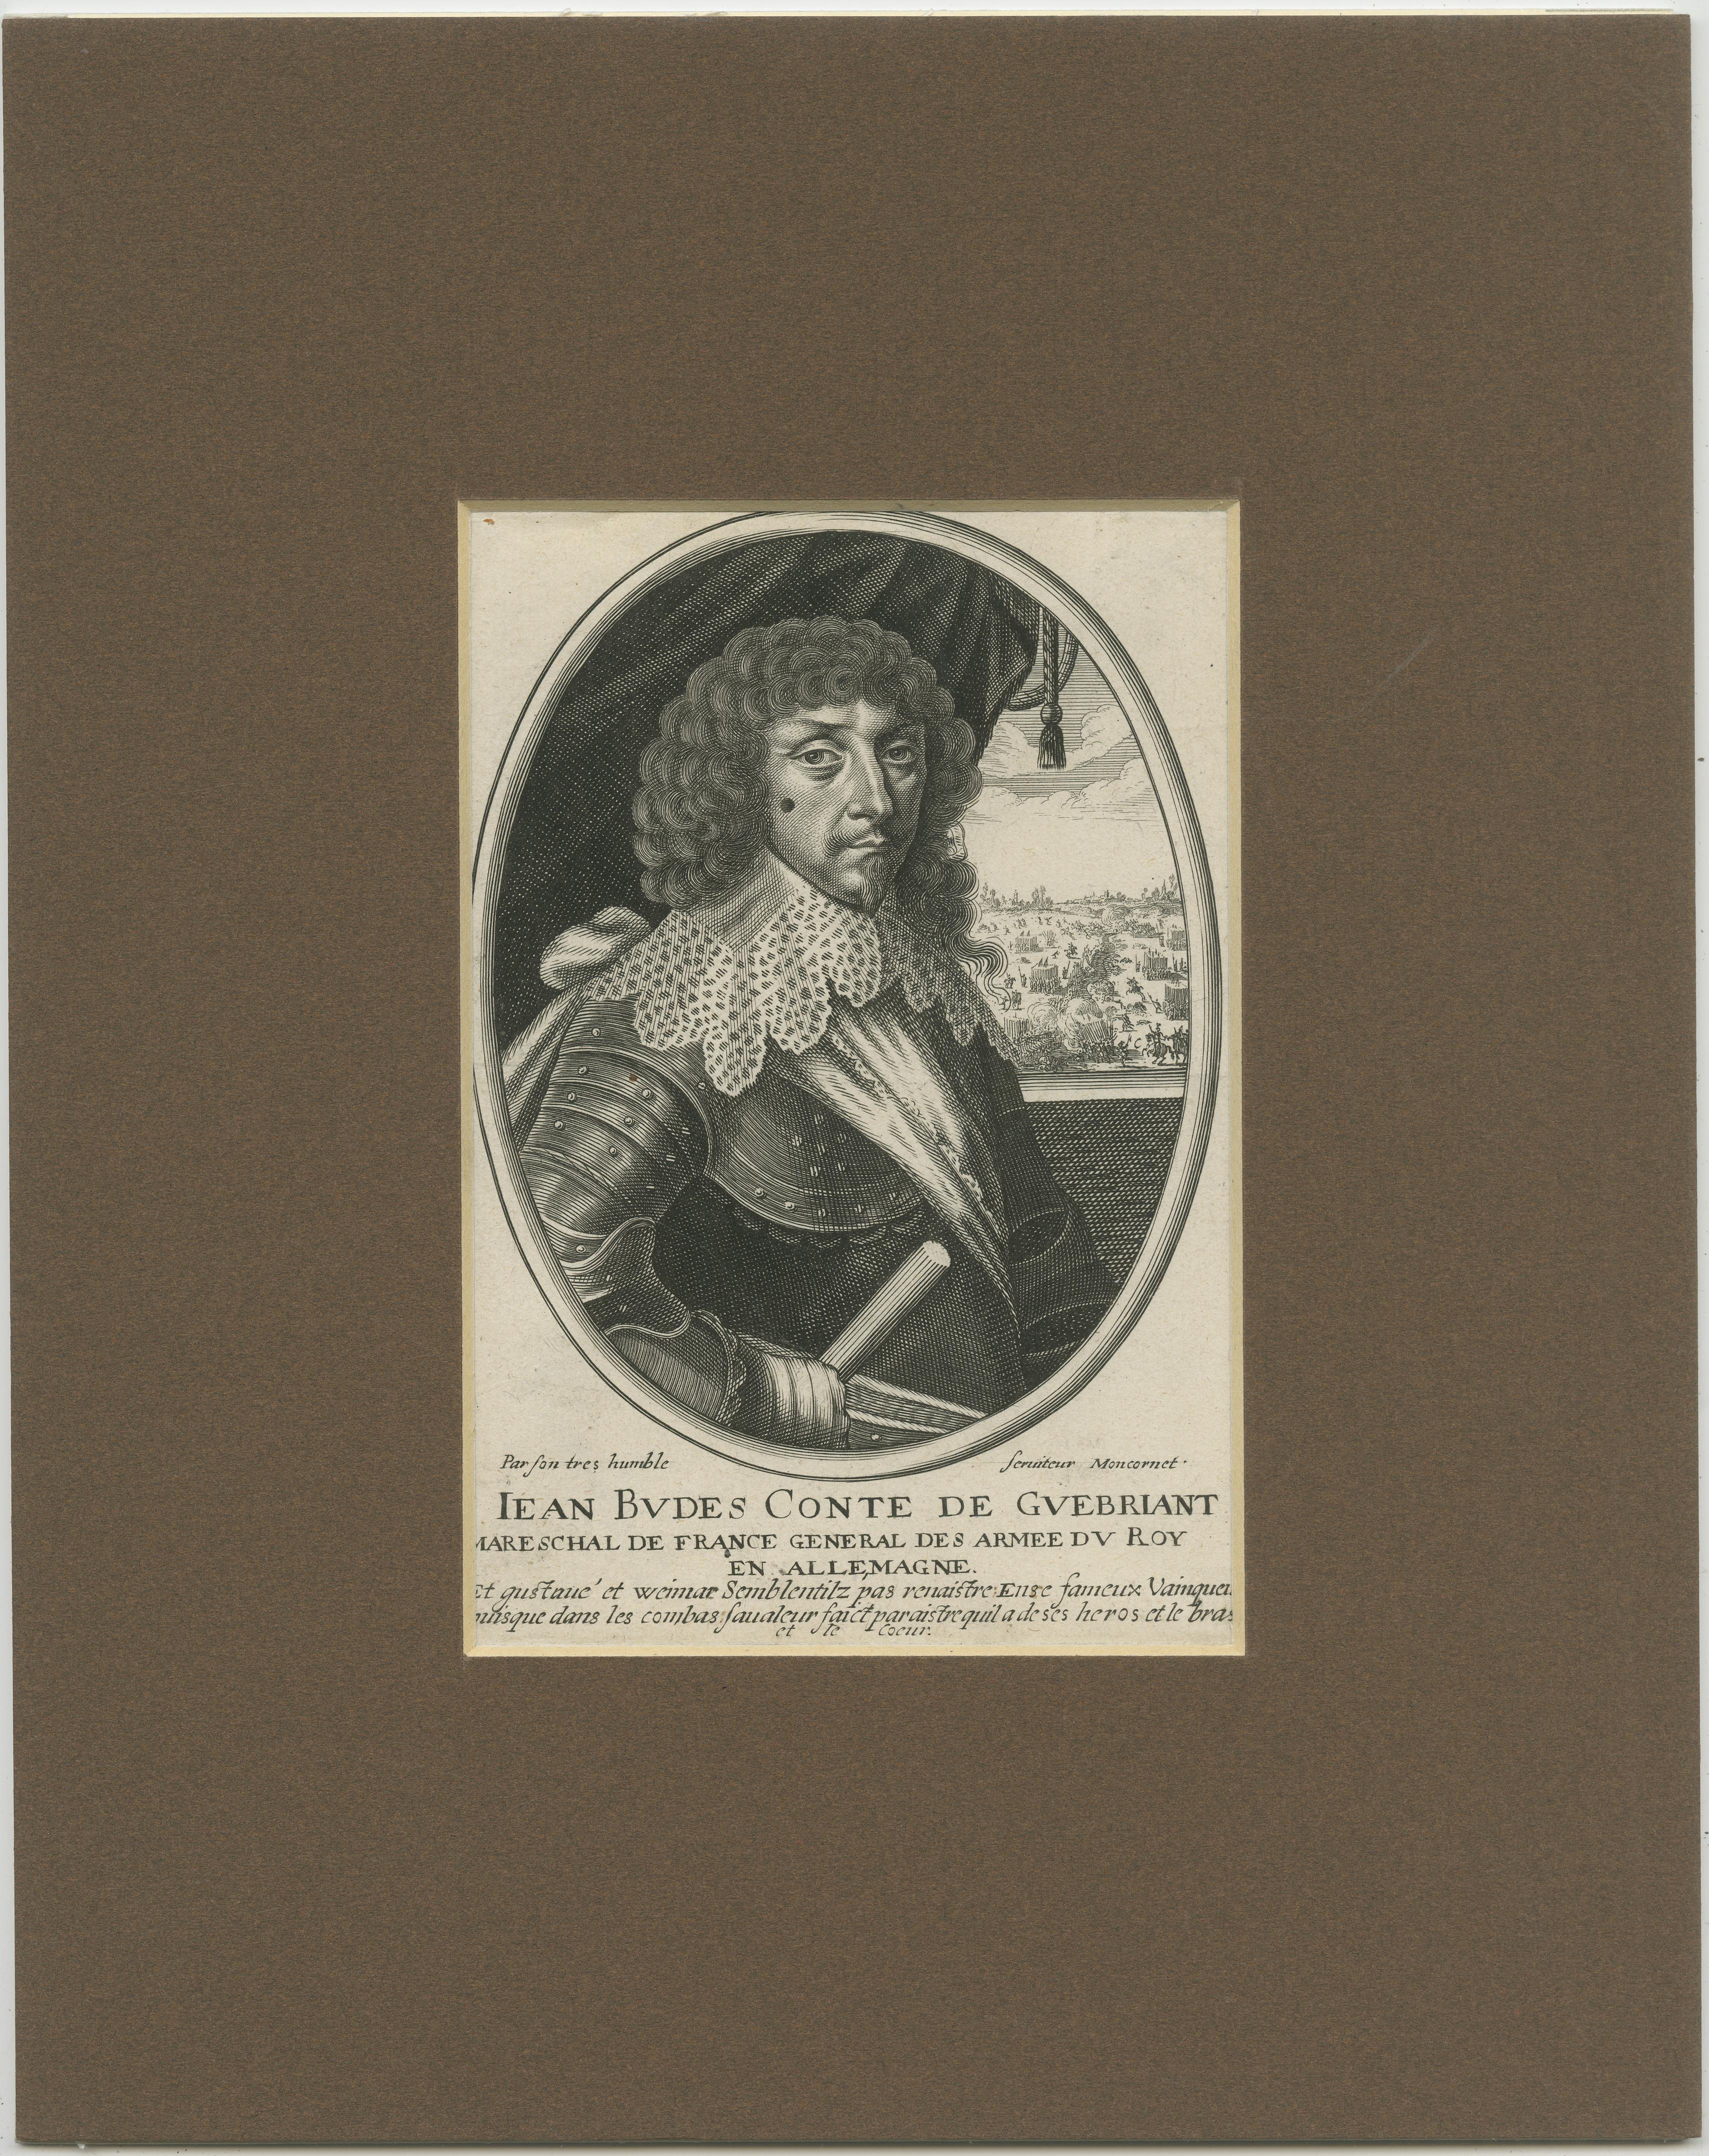 Antique print titled 'Jean Budes Conte de Guebriant (..)'. Portrait of Jean Baptiste Budes, Comte de Guébriant, half-length directed to right and looking to front, with shoulder-length curled hair, broad collar edged with lace, armour and sash; a